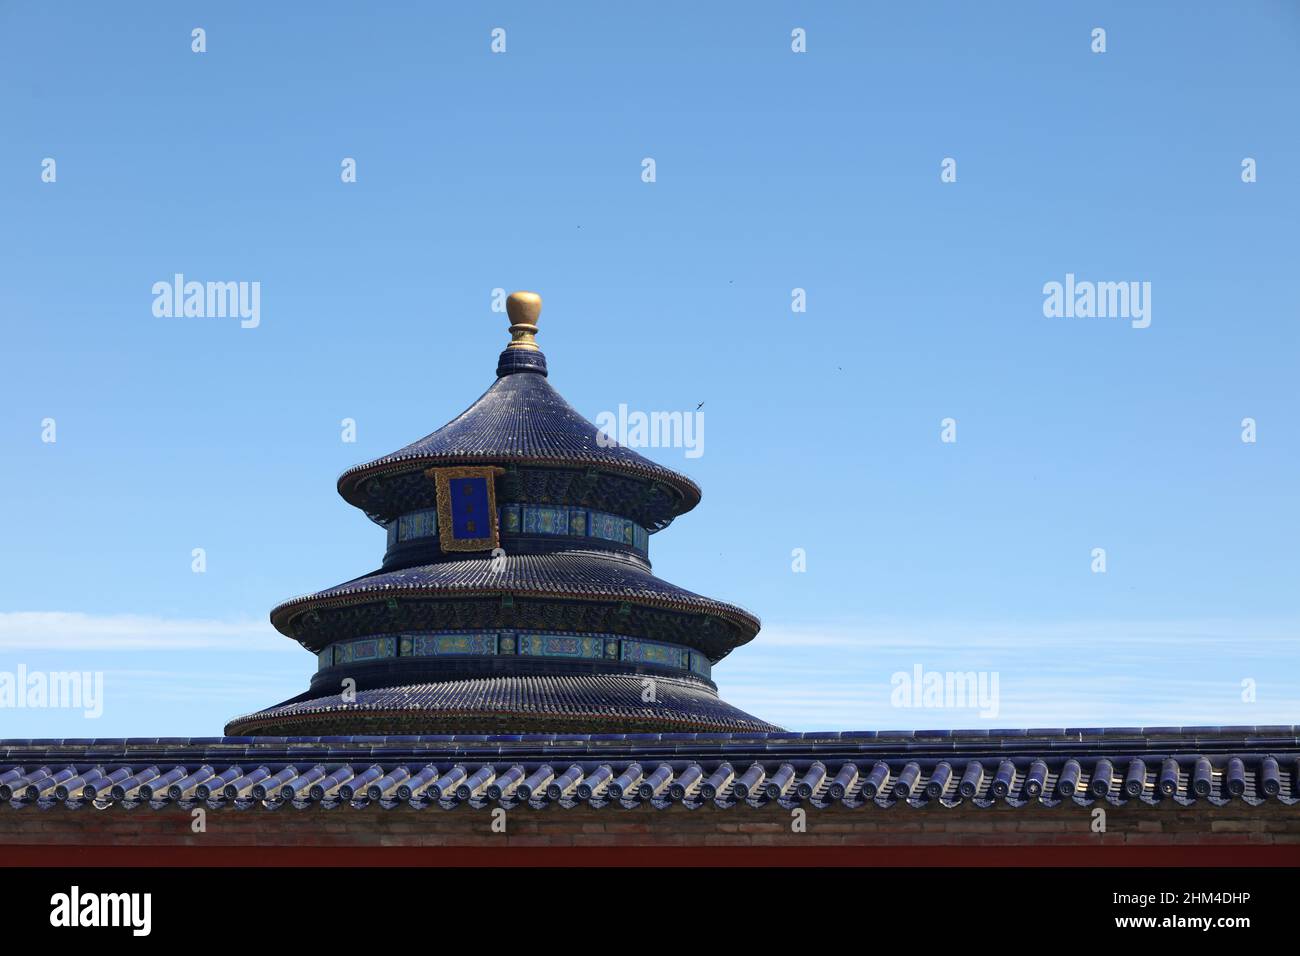 The temple of heaven park Stock Photo